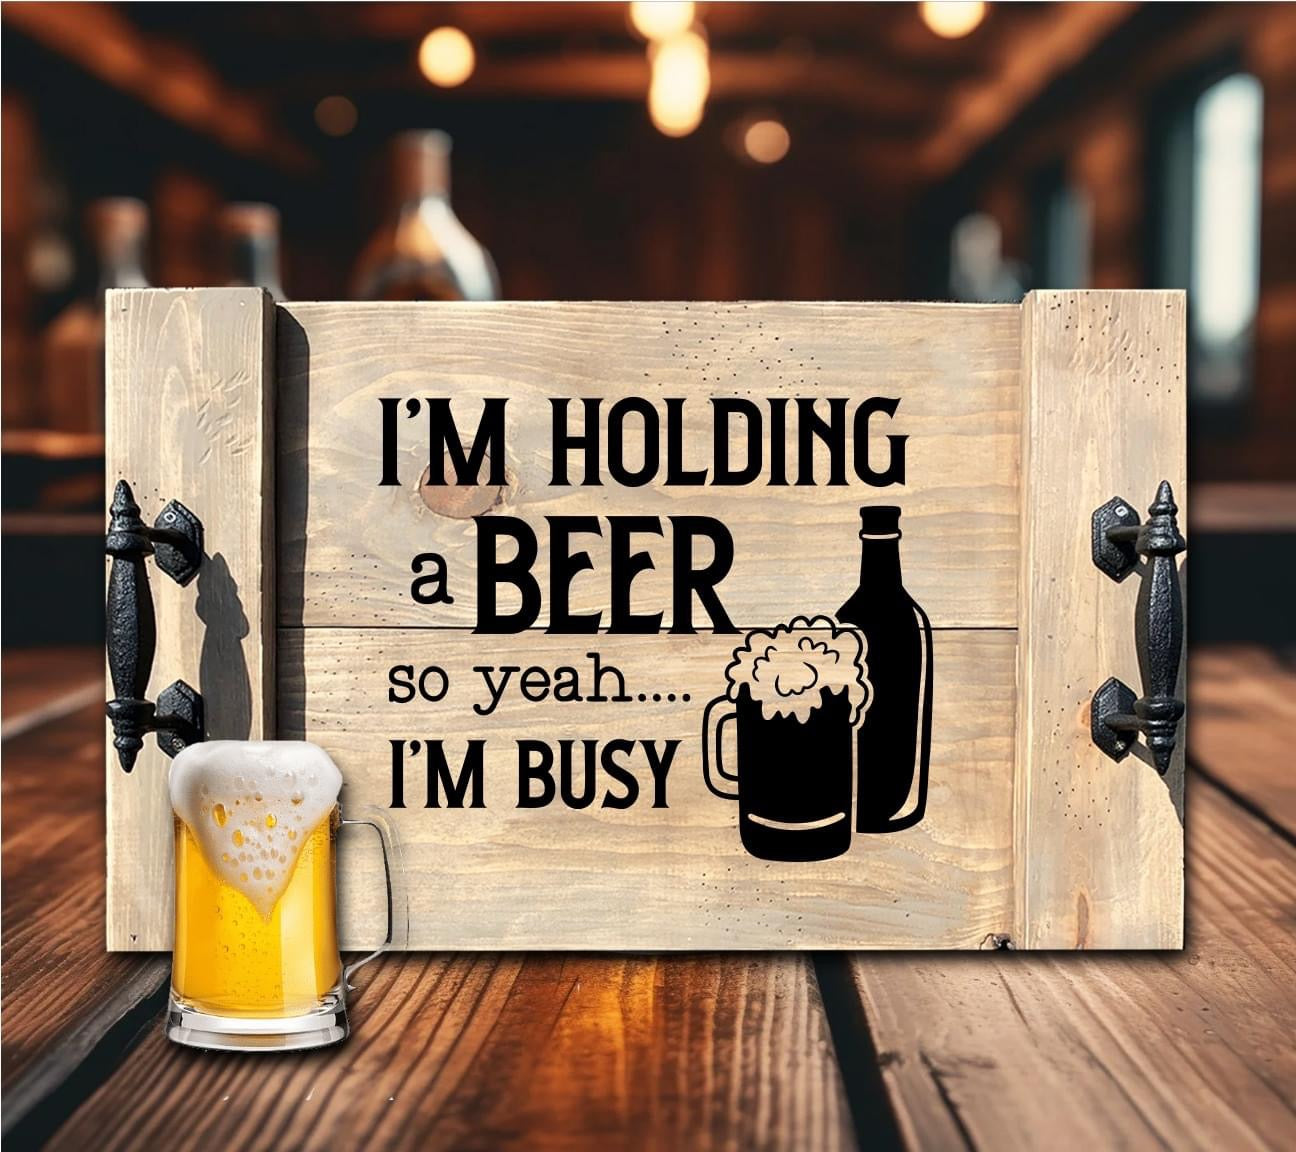 BEER TRAYS